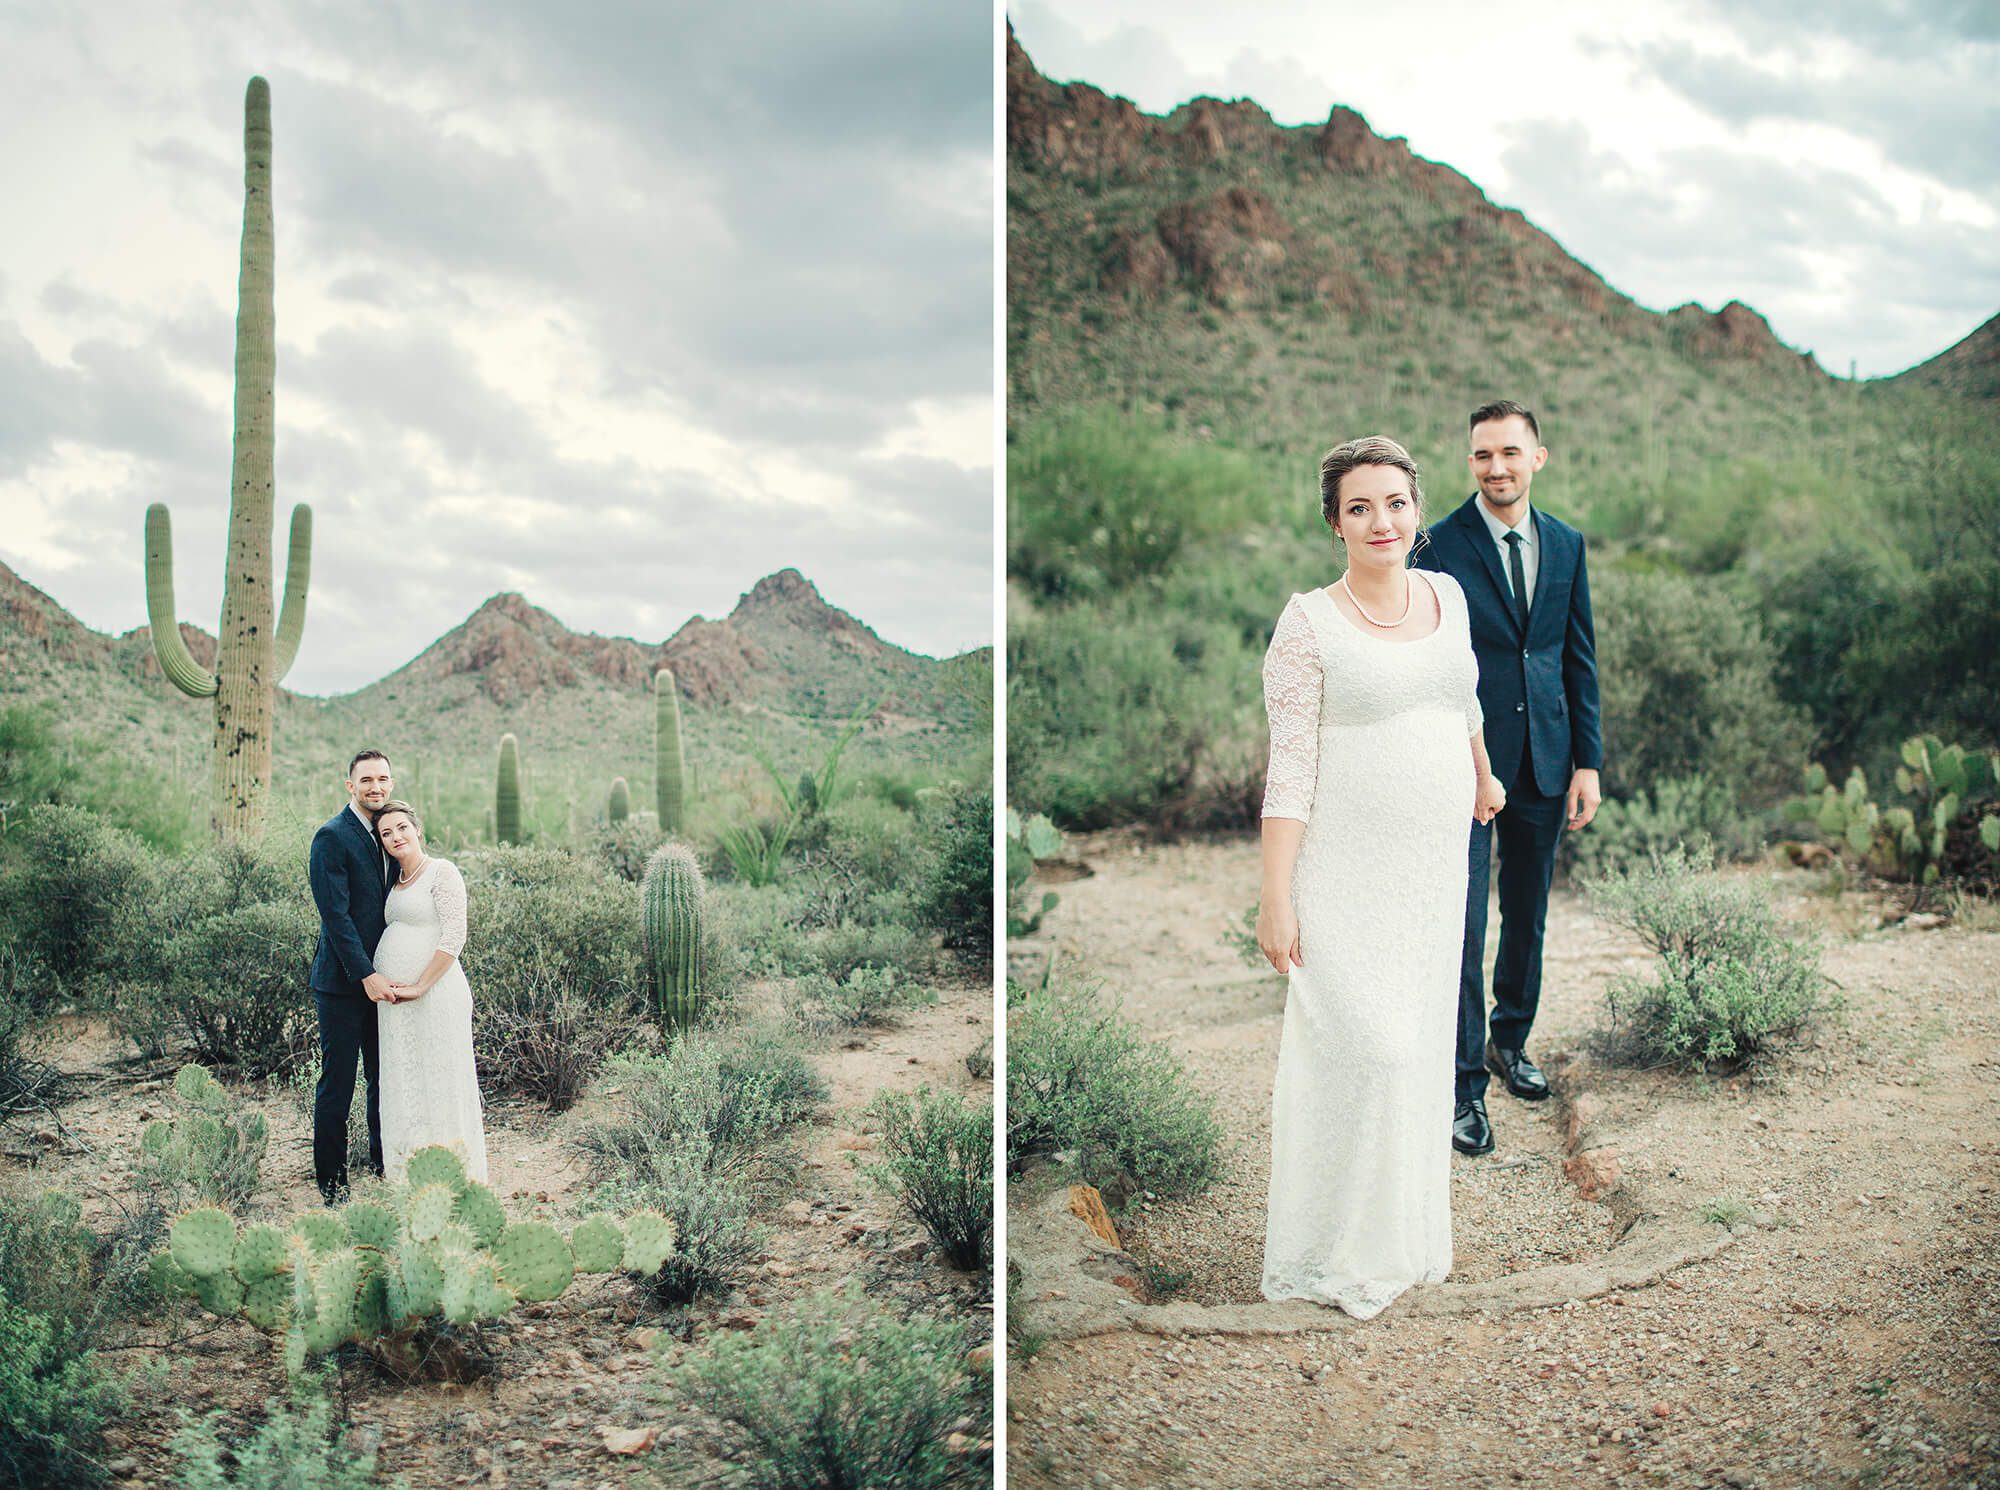 The Sonoran desert makes for a dramatic and breathtaking location for a desert elopement.